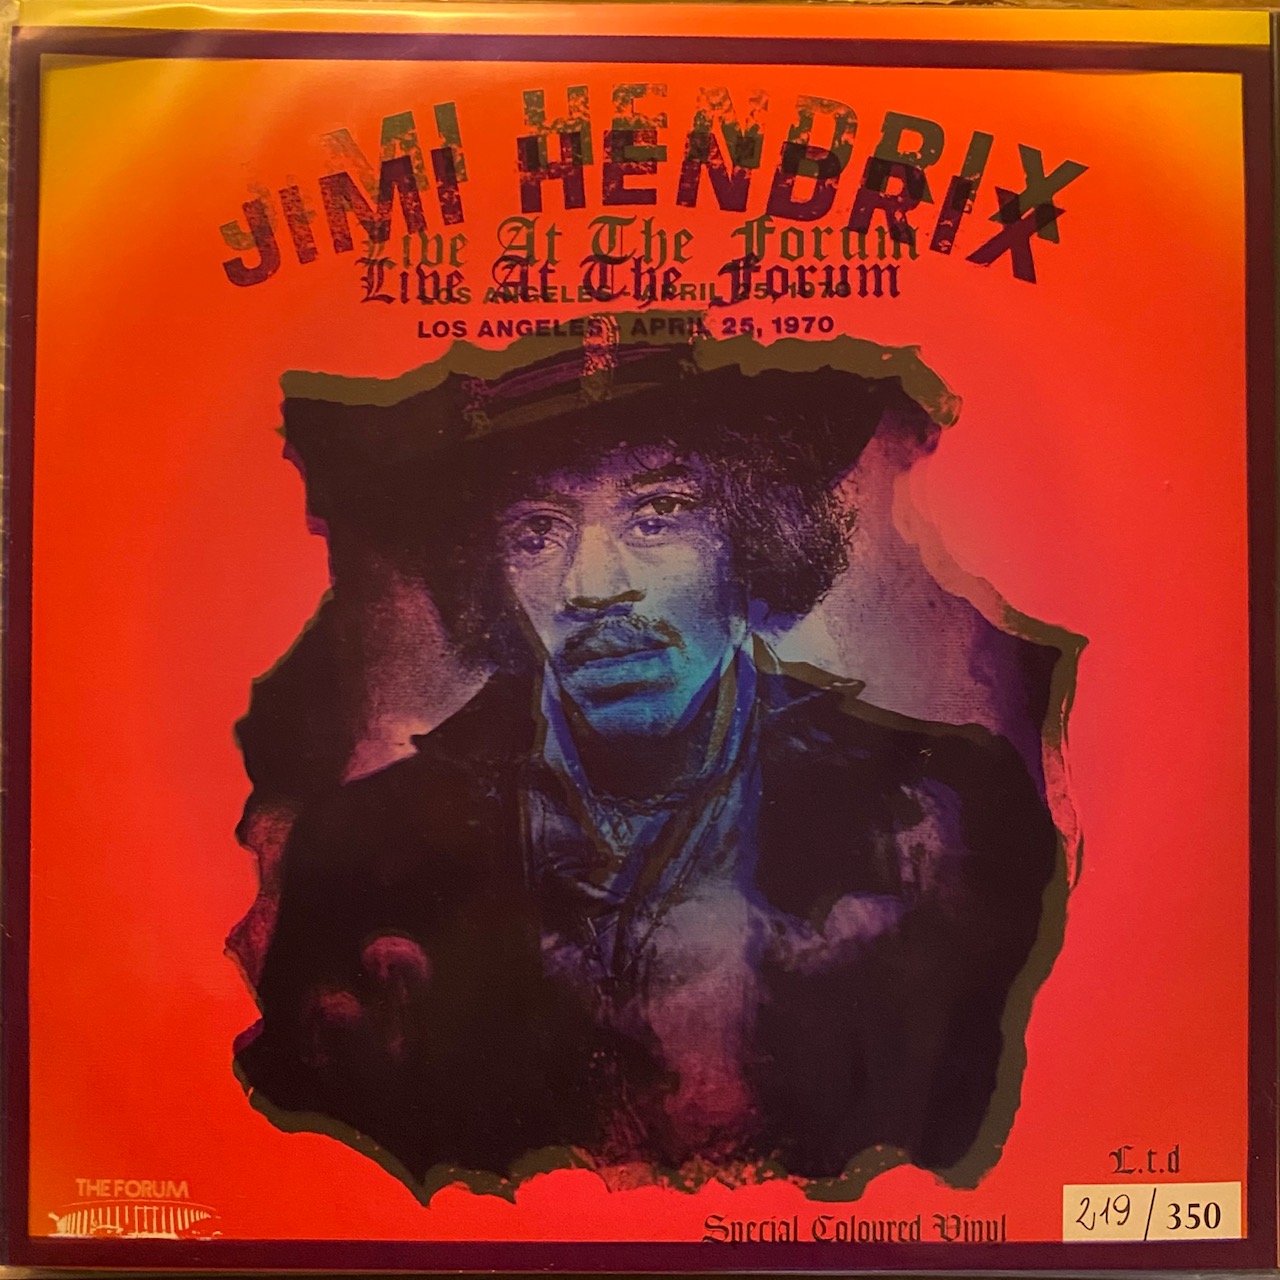 HENDRIX JIMI - LIVE AT THE FORUM, LOS ANGELES, APRIL 25/26 1970 - LIMITED AND NUMBERED EDITION